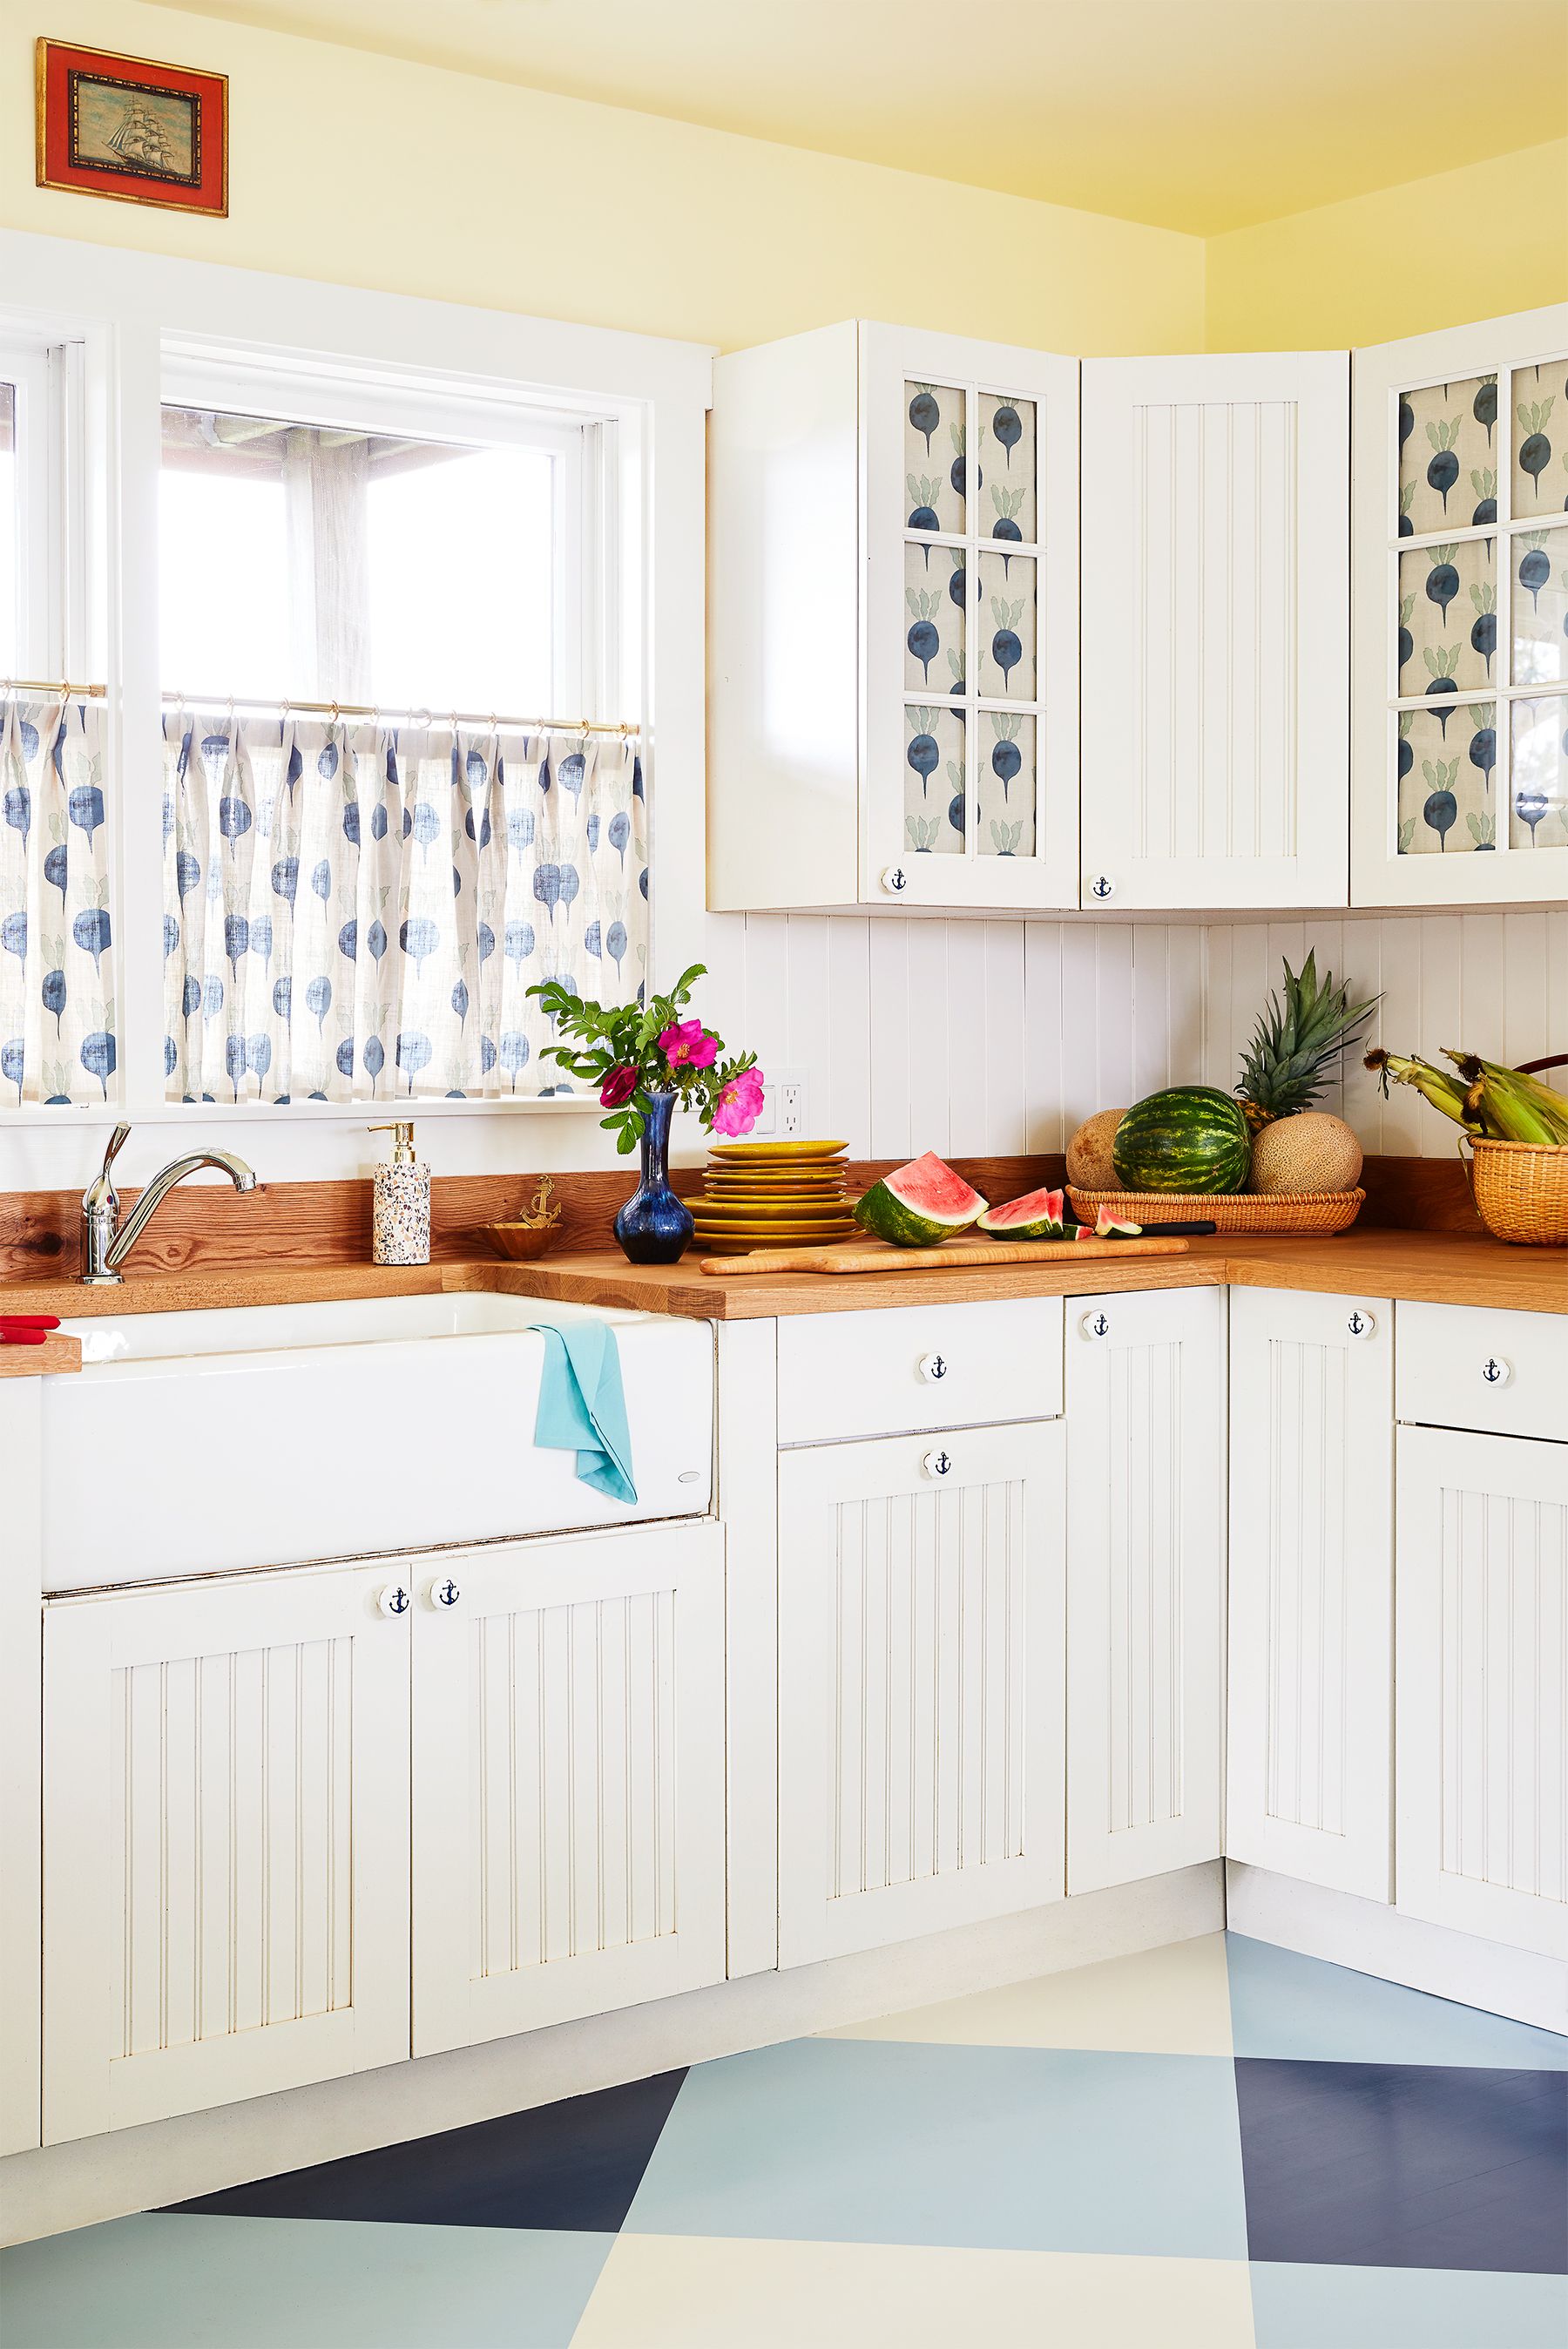 5 Best Kitchen Cabinet Paint Colors, According to Interior Designers